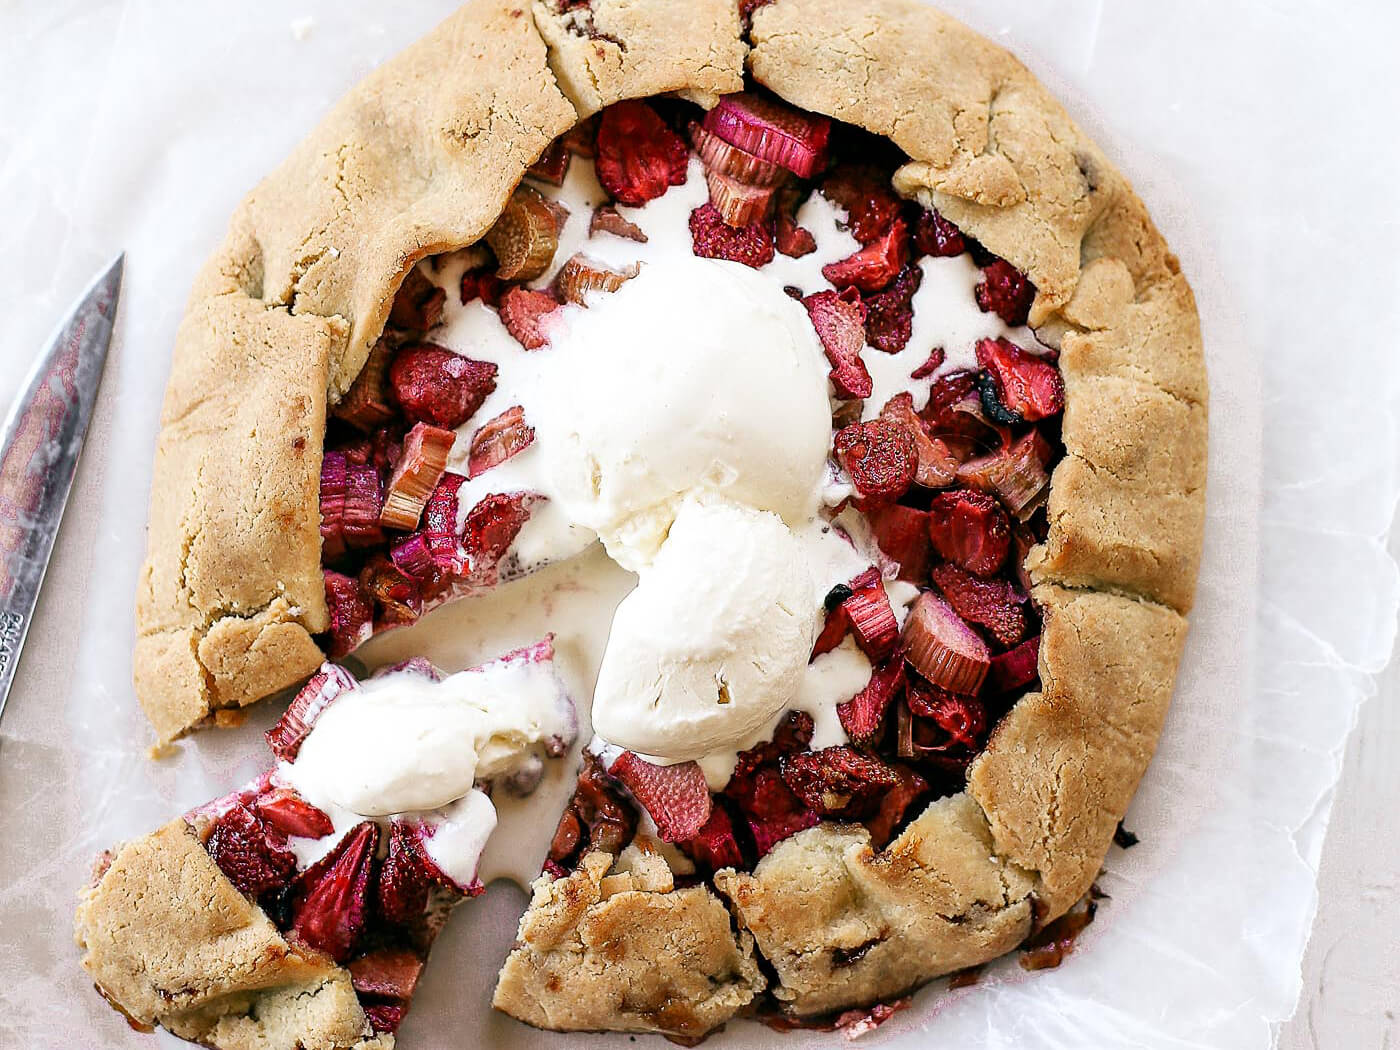 Incredibly easy grain free & paleo strawberry rhubarb galette. A healthy and simple summer treat made with whole food ingredients. Naturally gluten free and dairy free. Sweetened without refined sugar. That sugary gooey fruit filling is to die for! Especially paired with a light and “buttery” almond flour crust. Gluten free galette. Paleo fruit galette. best paleo strawberry galette. easy healthy galette recipe. paleo galette recipe. easy gluten free summer desserts. grain free pie crust. grain free strawberry rhubarb galette.